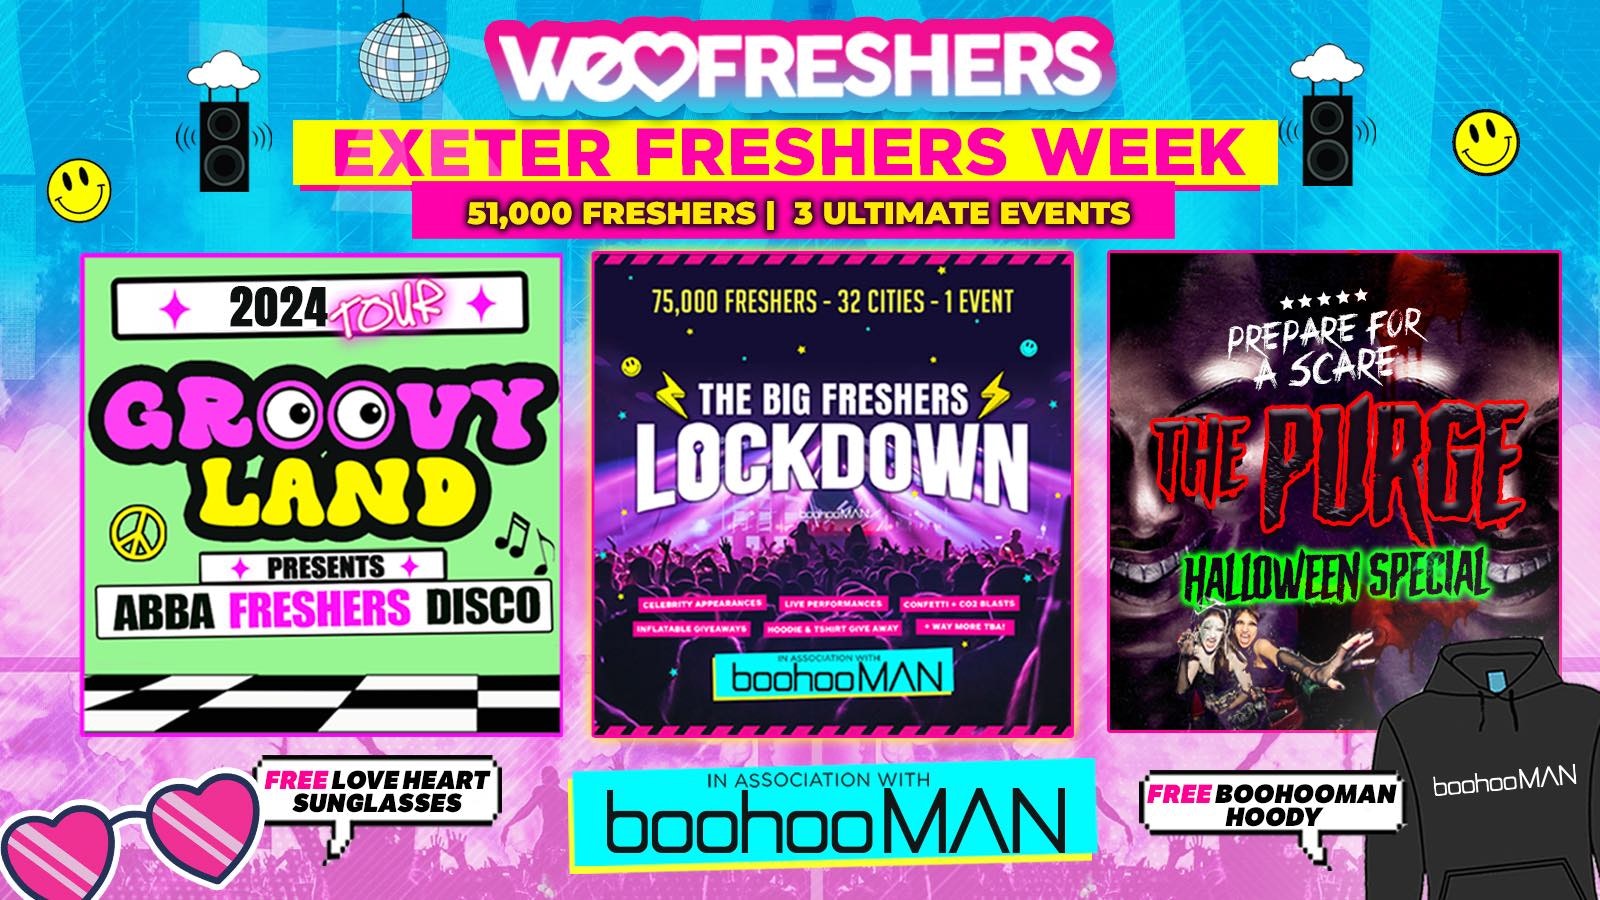 WE LOVE EXETER FRESHERS 2024 in association with boohooMAN ❗FREE BOOHOOMAN HOODIE TODAY ONLY❗